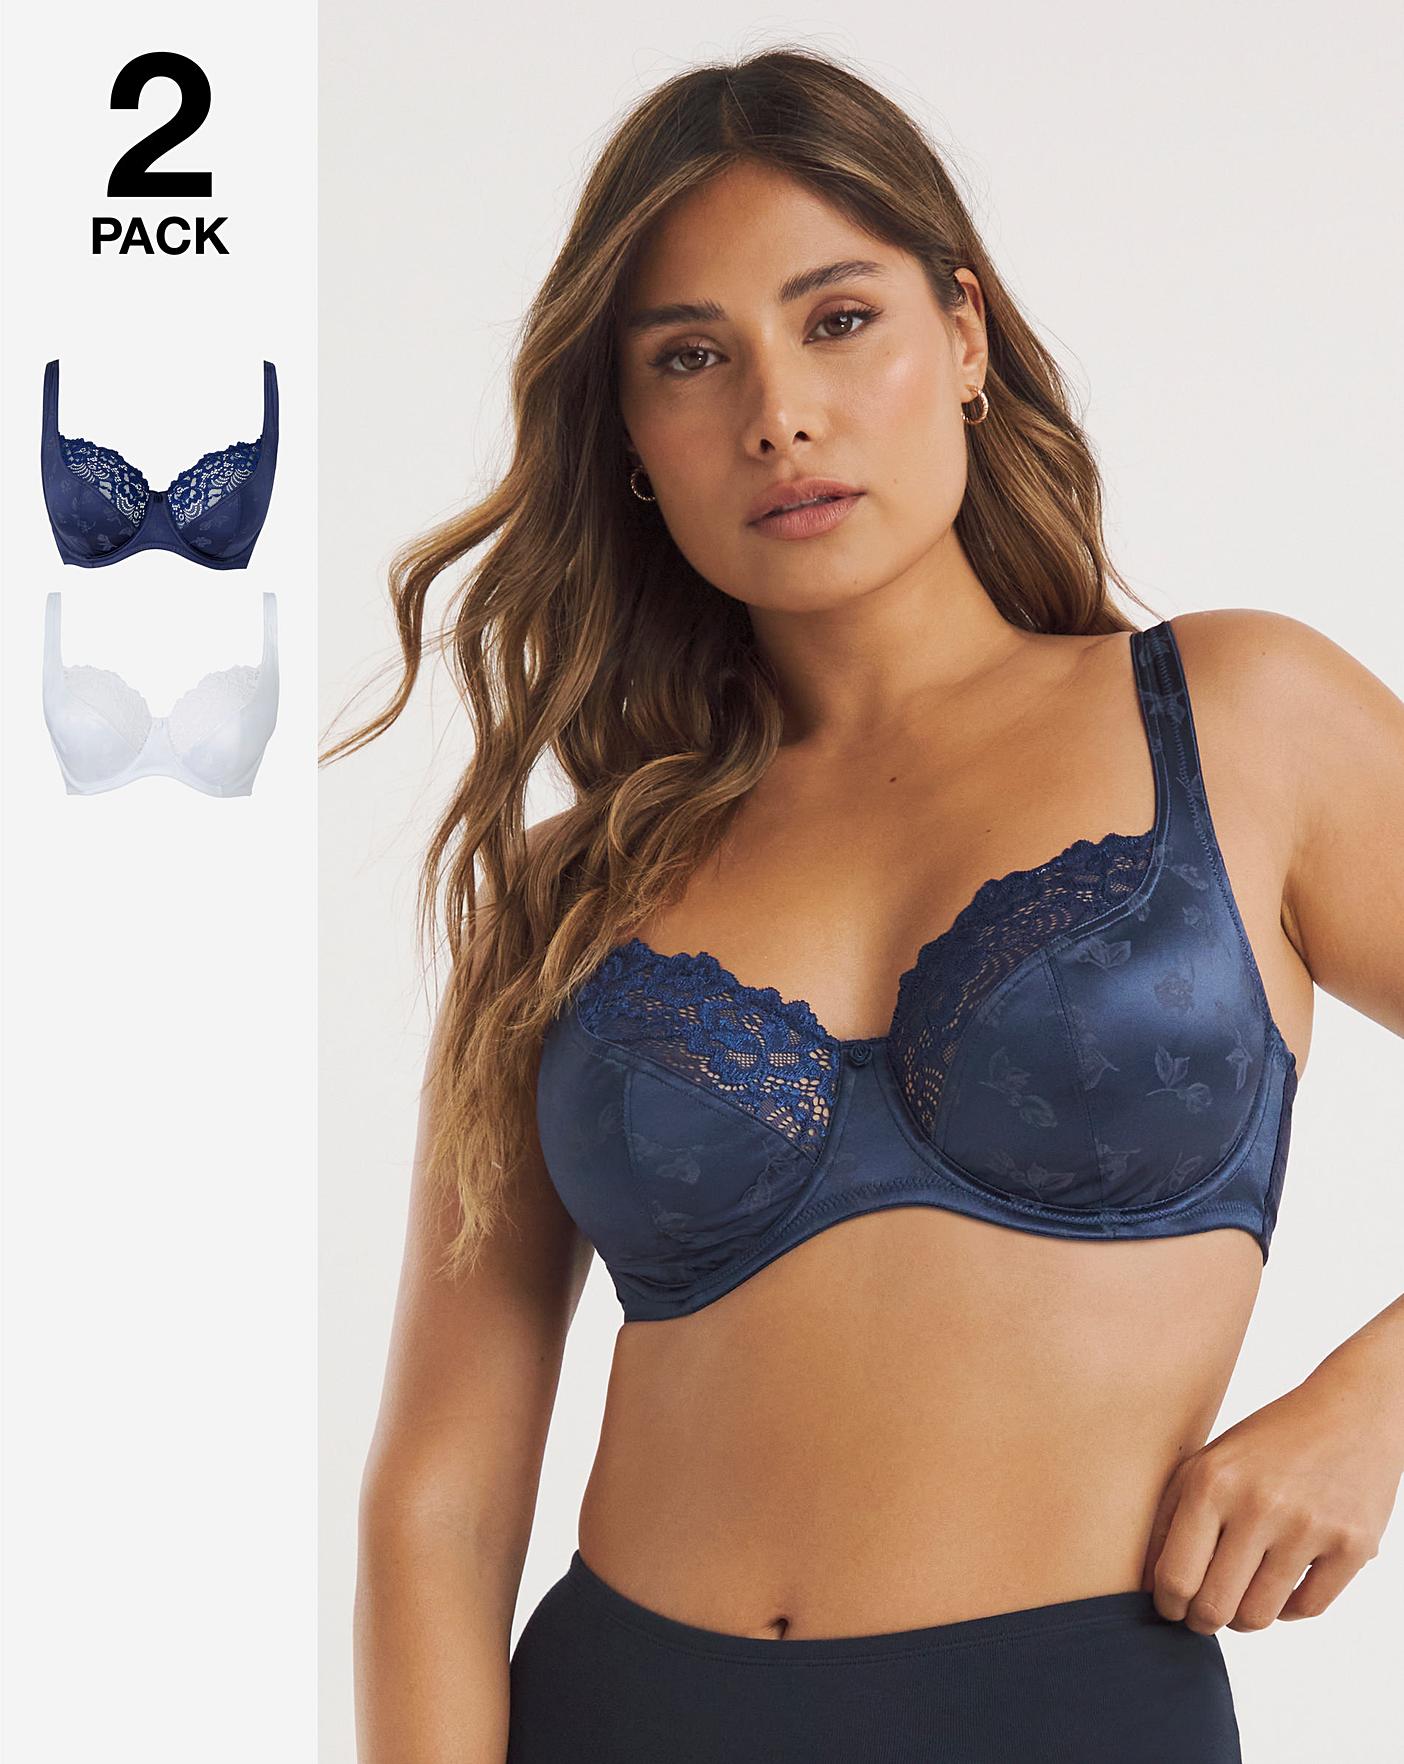 New lace bras up to cup F 